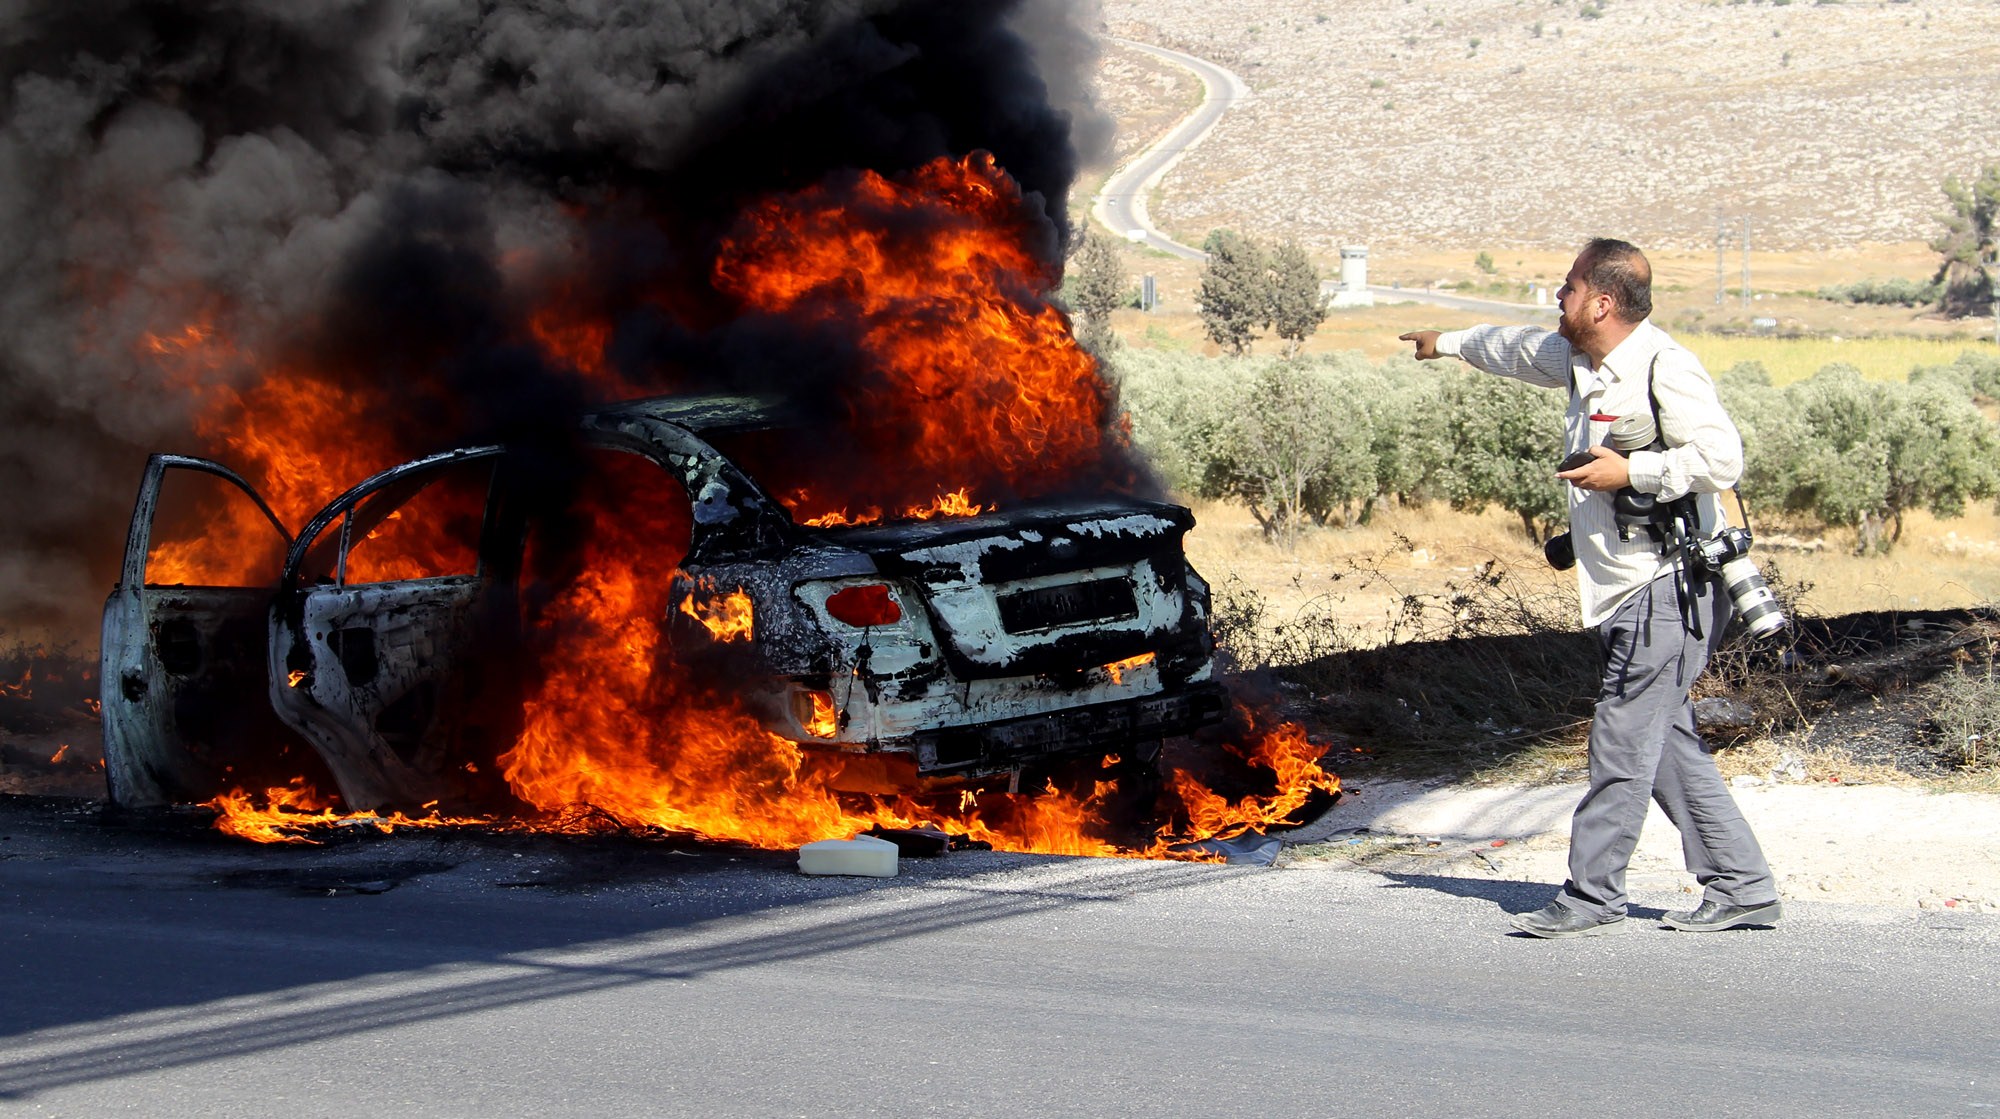 Best Fiero impression goes to THAT car! (Photo credit should read -/AFP/Getty Images)